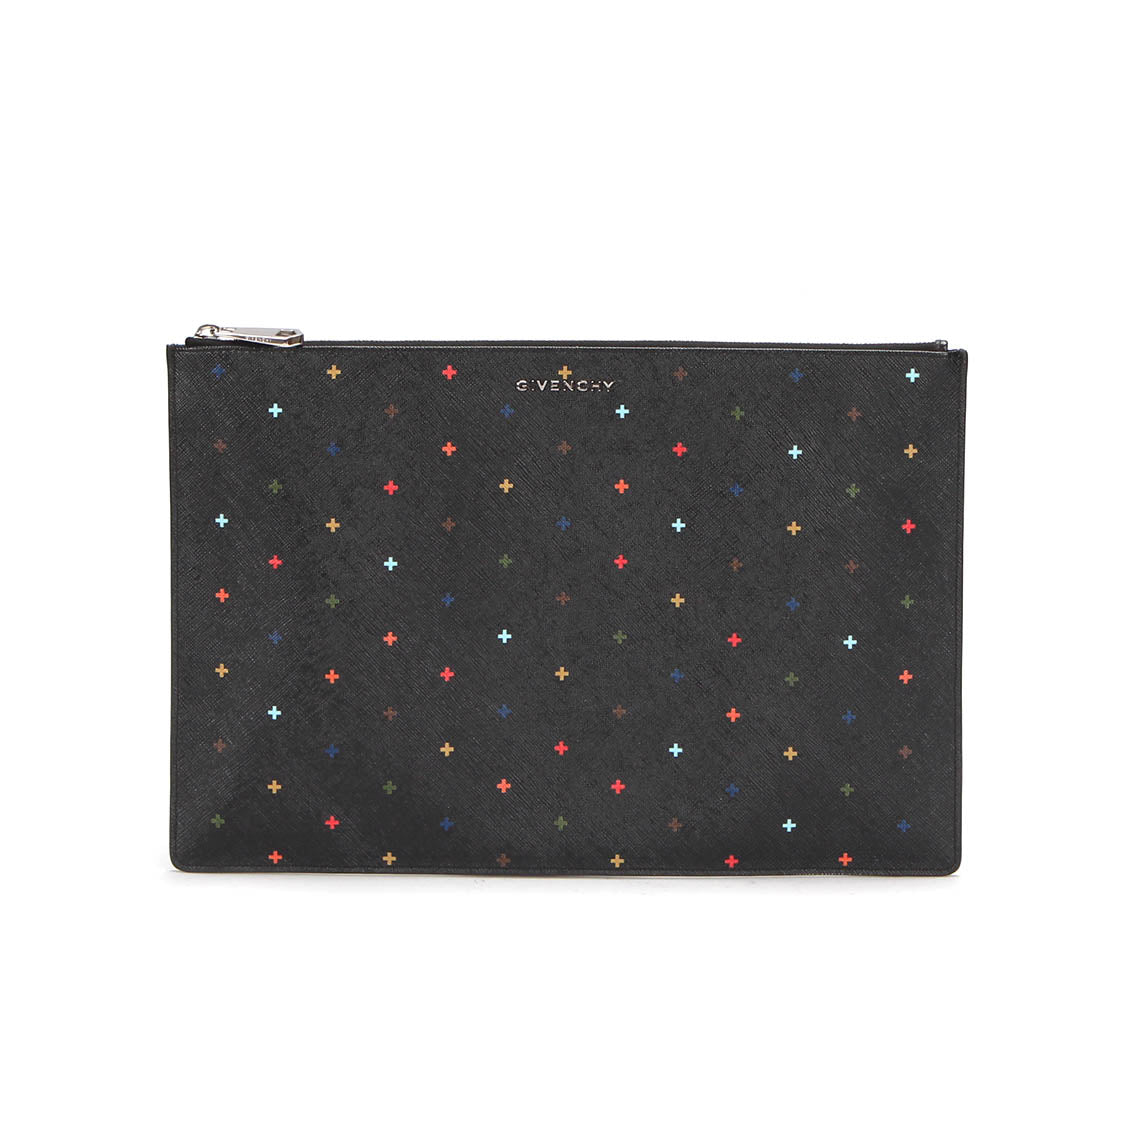 Printed Leather Clutch Bag